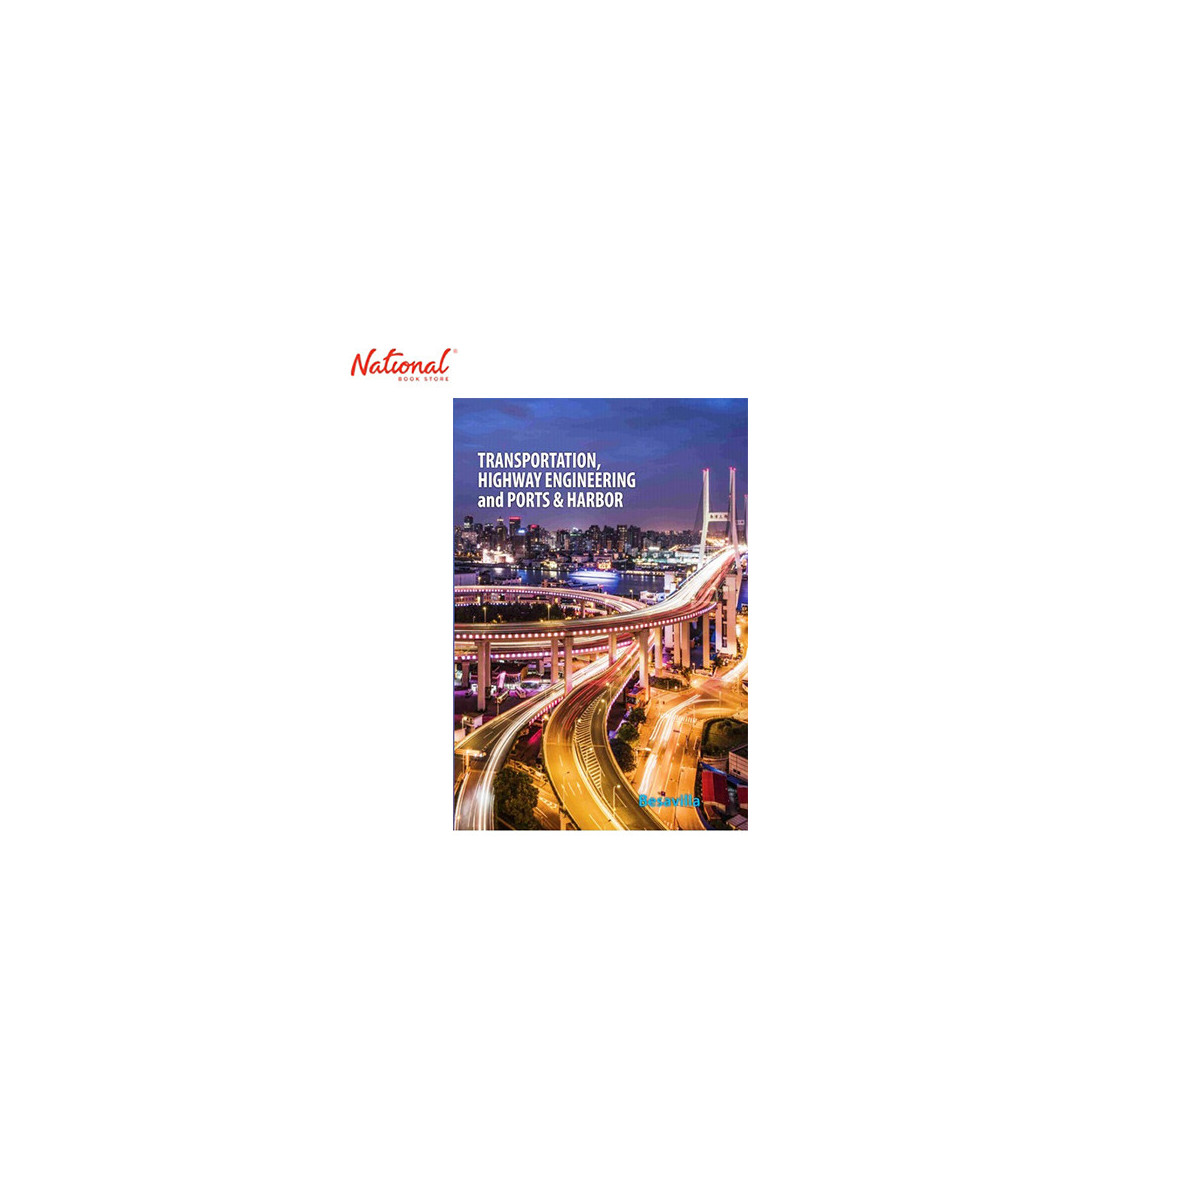 TRANSPORTATION HIGHWAY ENGINEERING AND PORTS & HARBOR